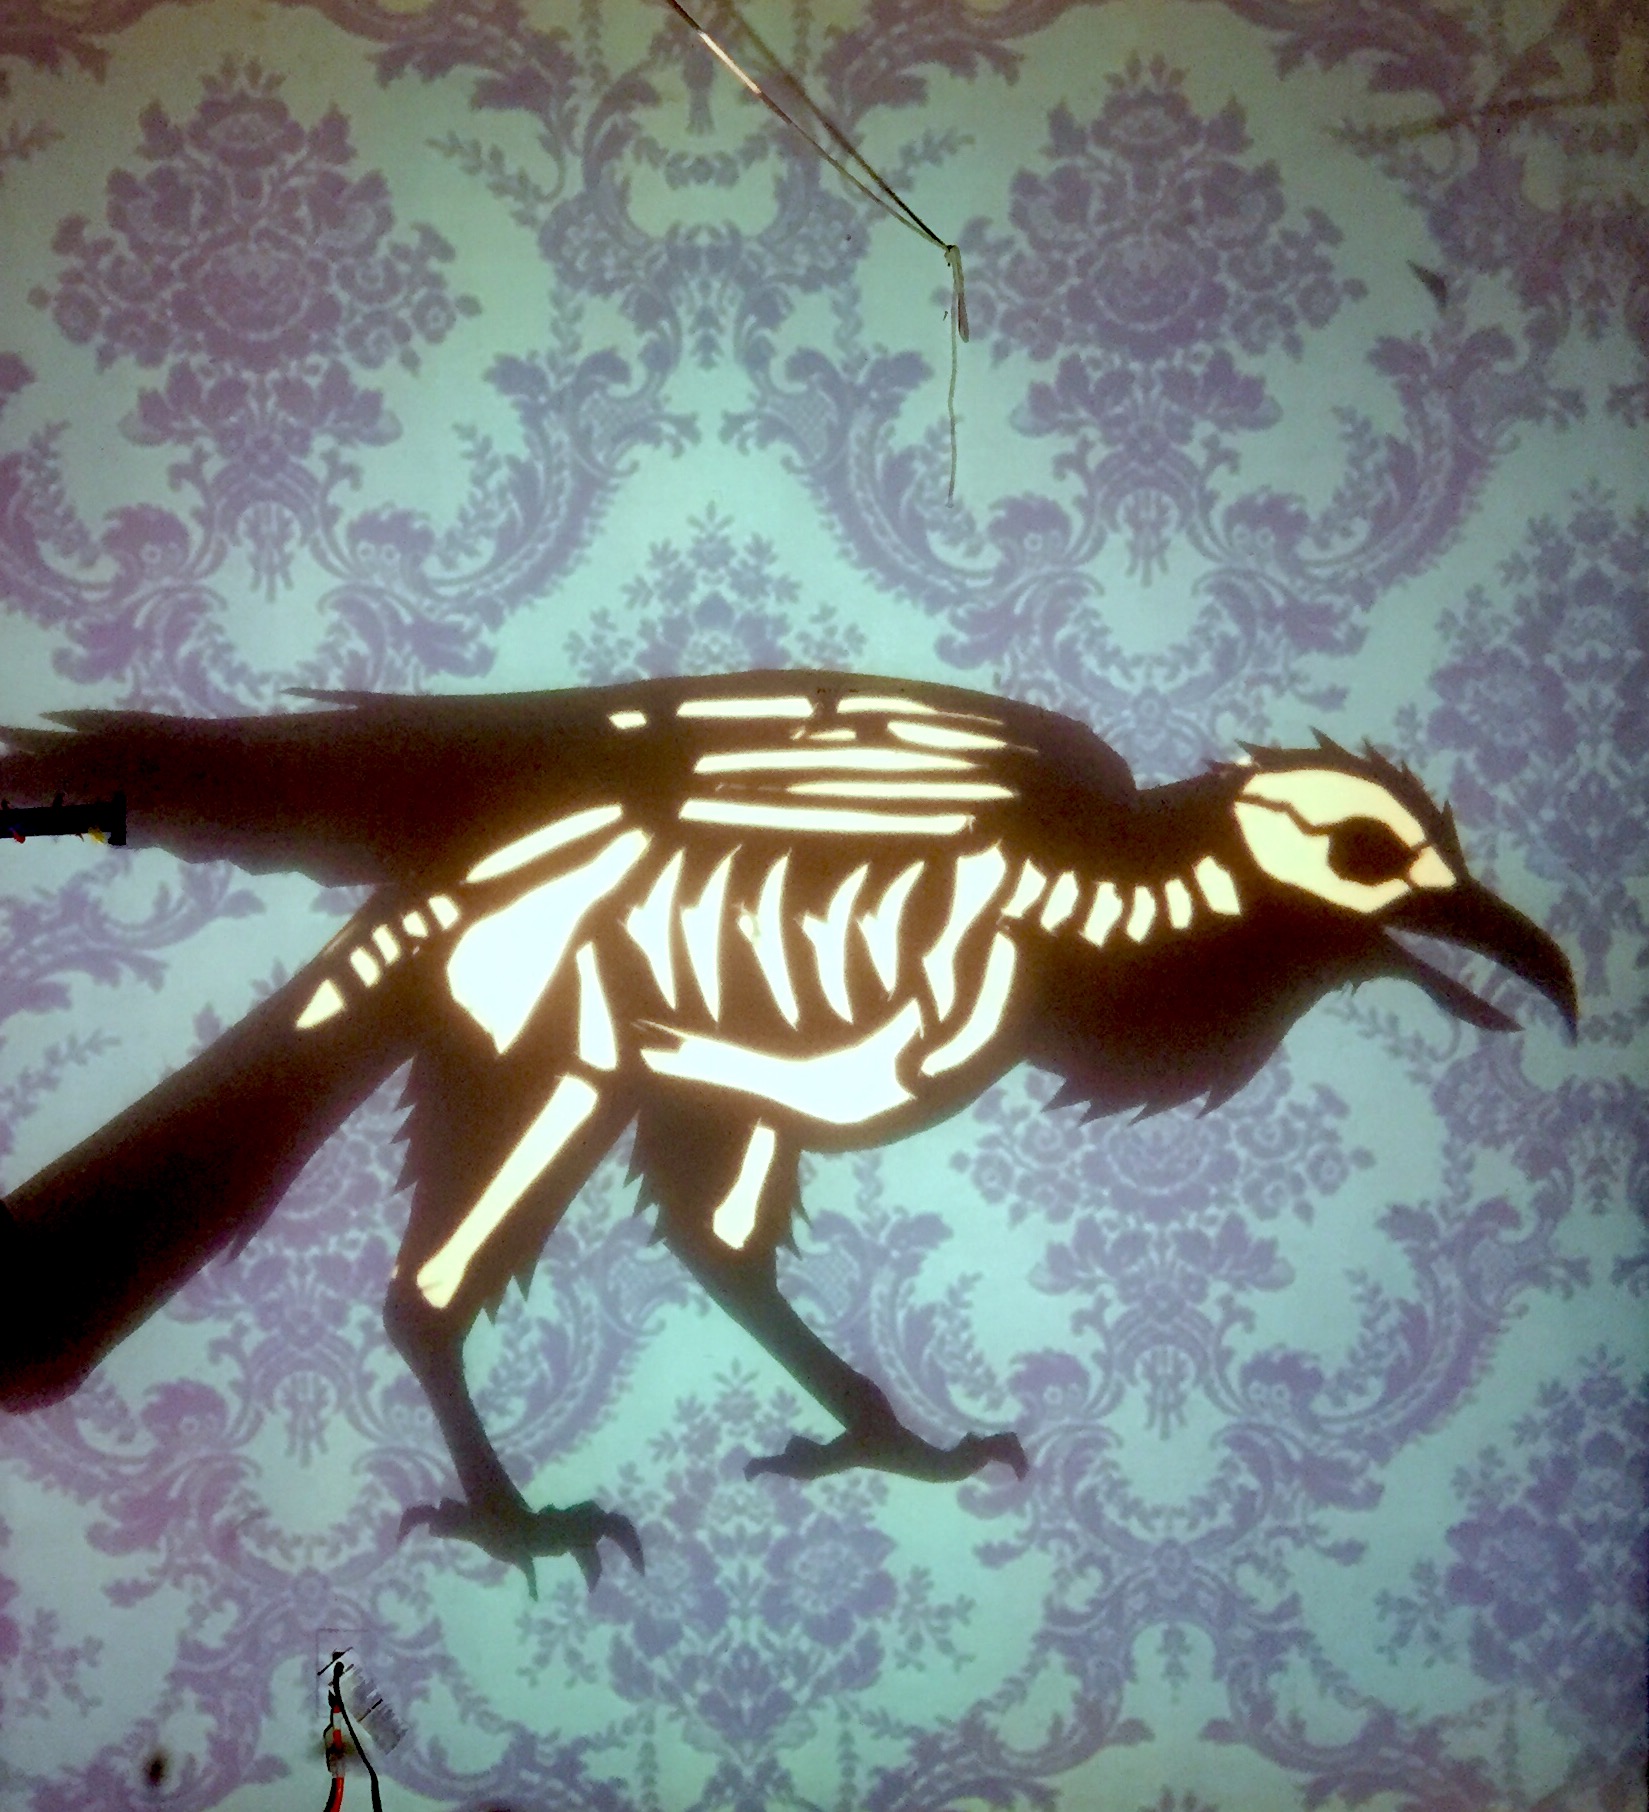 As lightning flashes we see the skeleton of the raven.